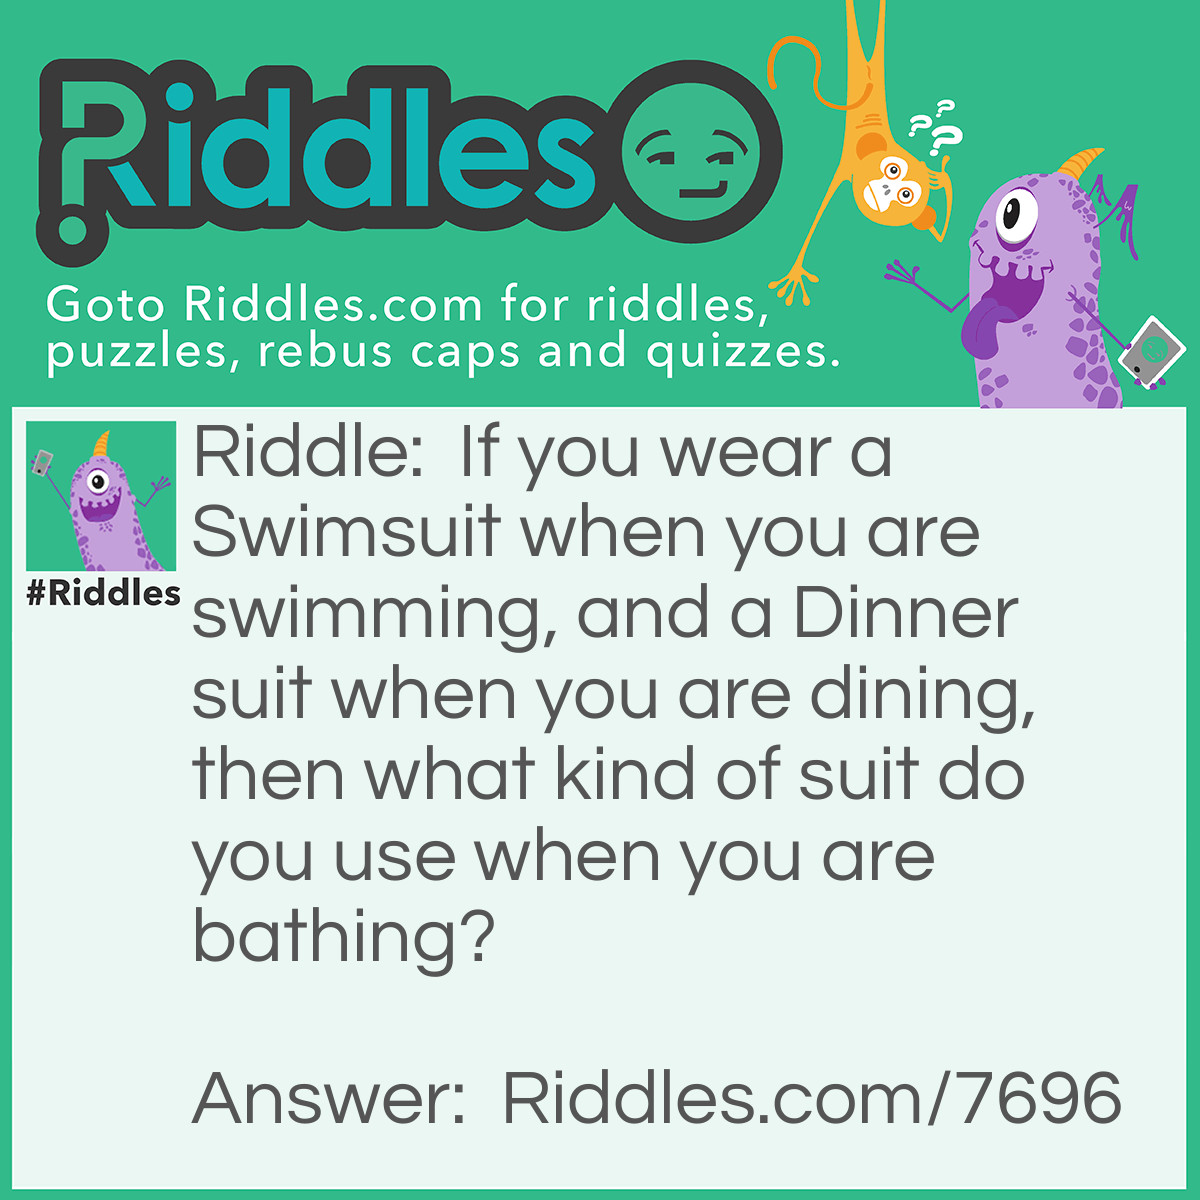 Riddle: If you wear a Swimsuit when you are swimming, and a Dinner suit when you are dining, then what kind of suit do you use when you are bathing? Answer: Birthday!! Bathing suit and swimsuit are for the same thing. ;-P